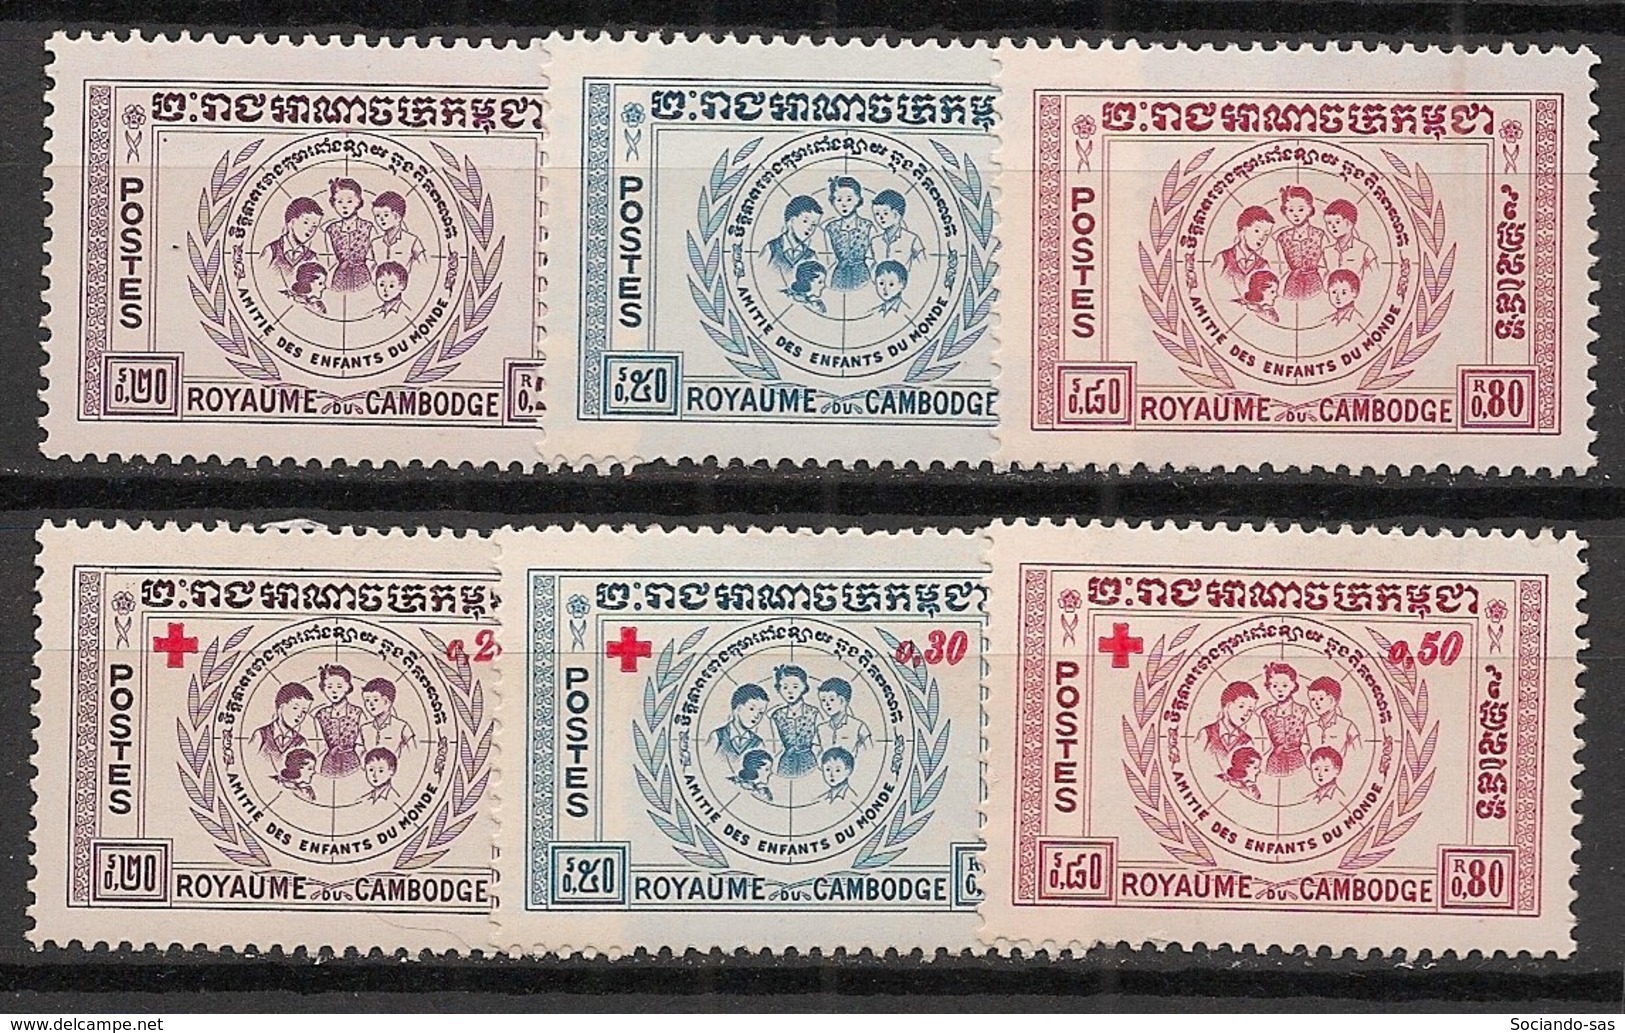 Cambodge - 1959 - N°Yv. 78 à 83 - Série Complète - Neuf Luxe ** / MNH / Postfrisch - Cambogia